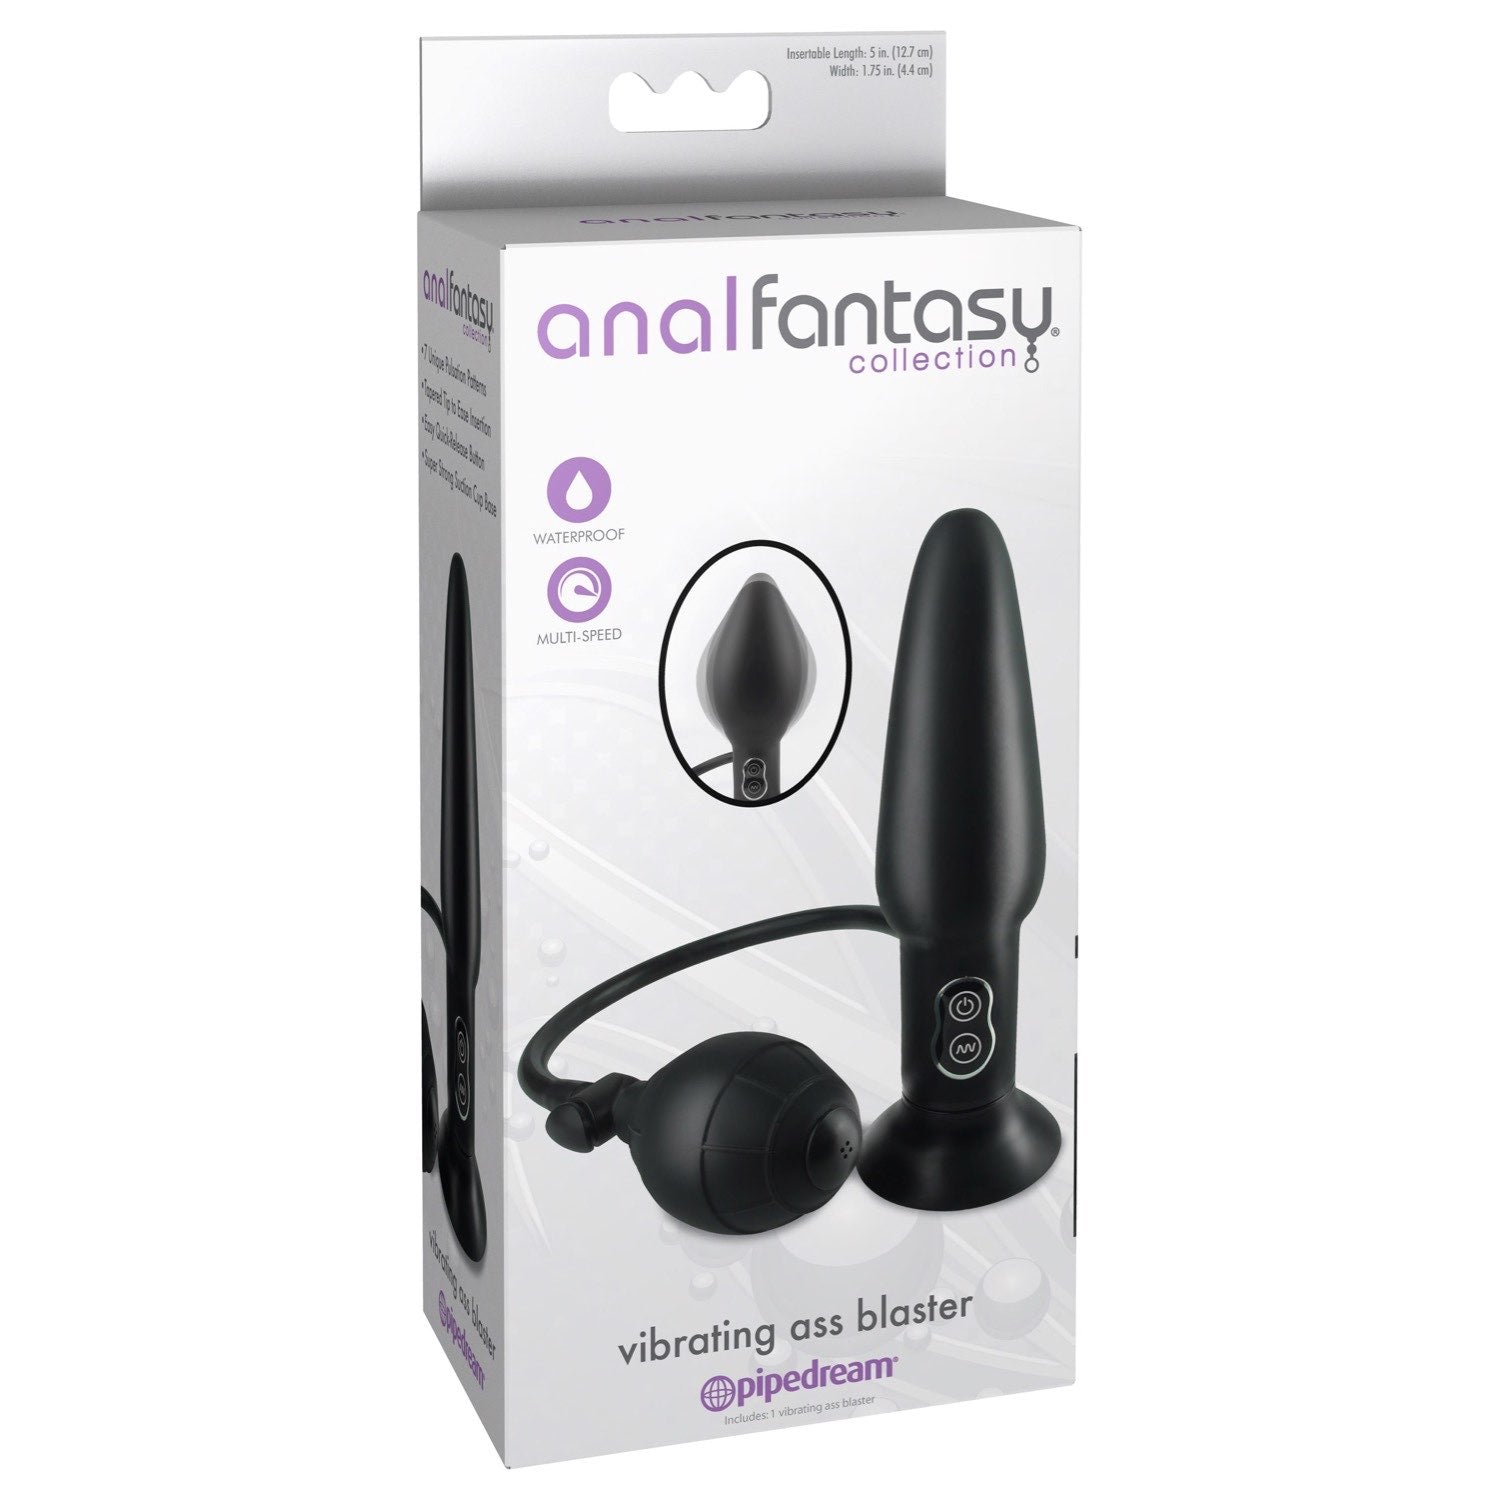 Anal Fantasy Collection Vibrating Ass Blaster - Black 10.1 cm (4&quot;) Inflatable Vibrating Butt Plug by Pipedream